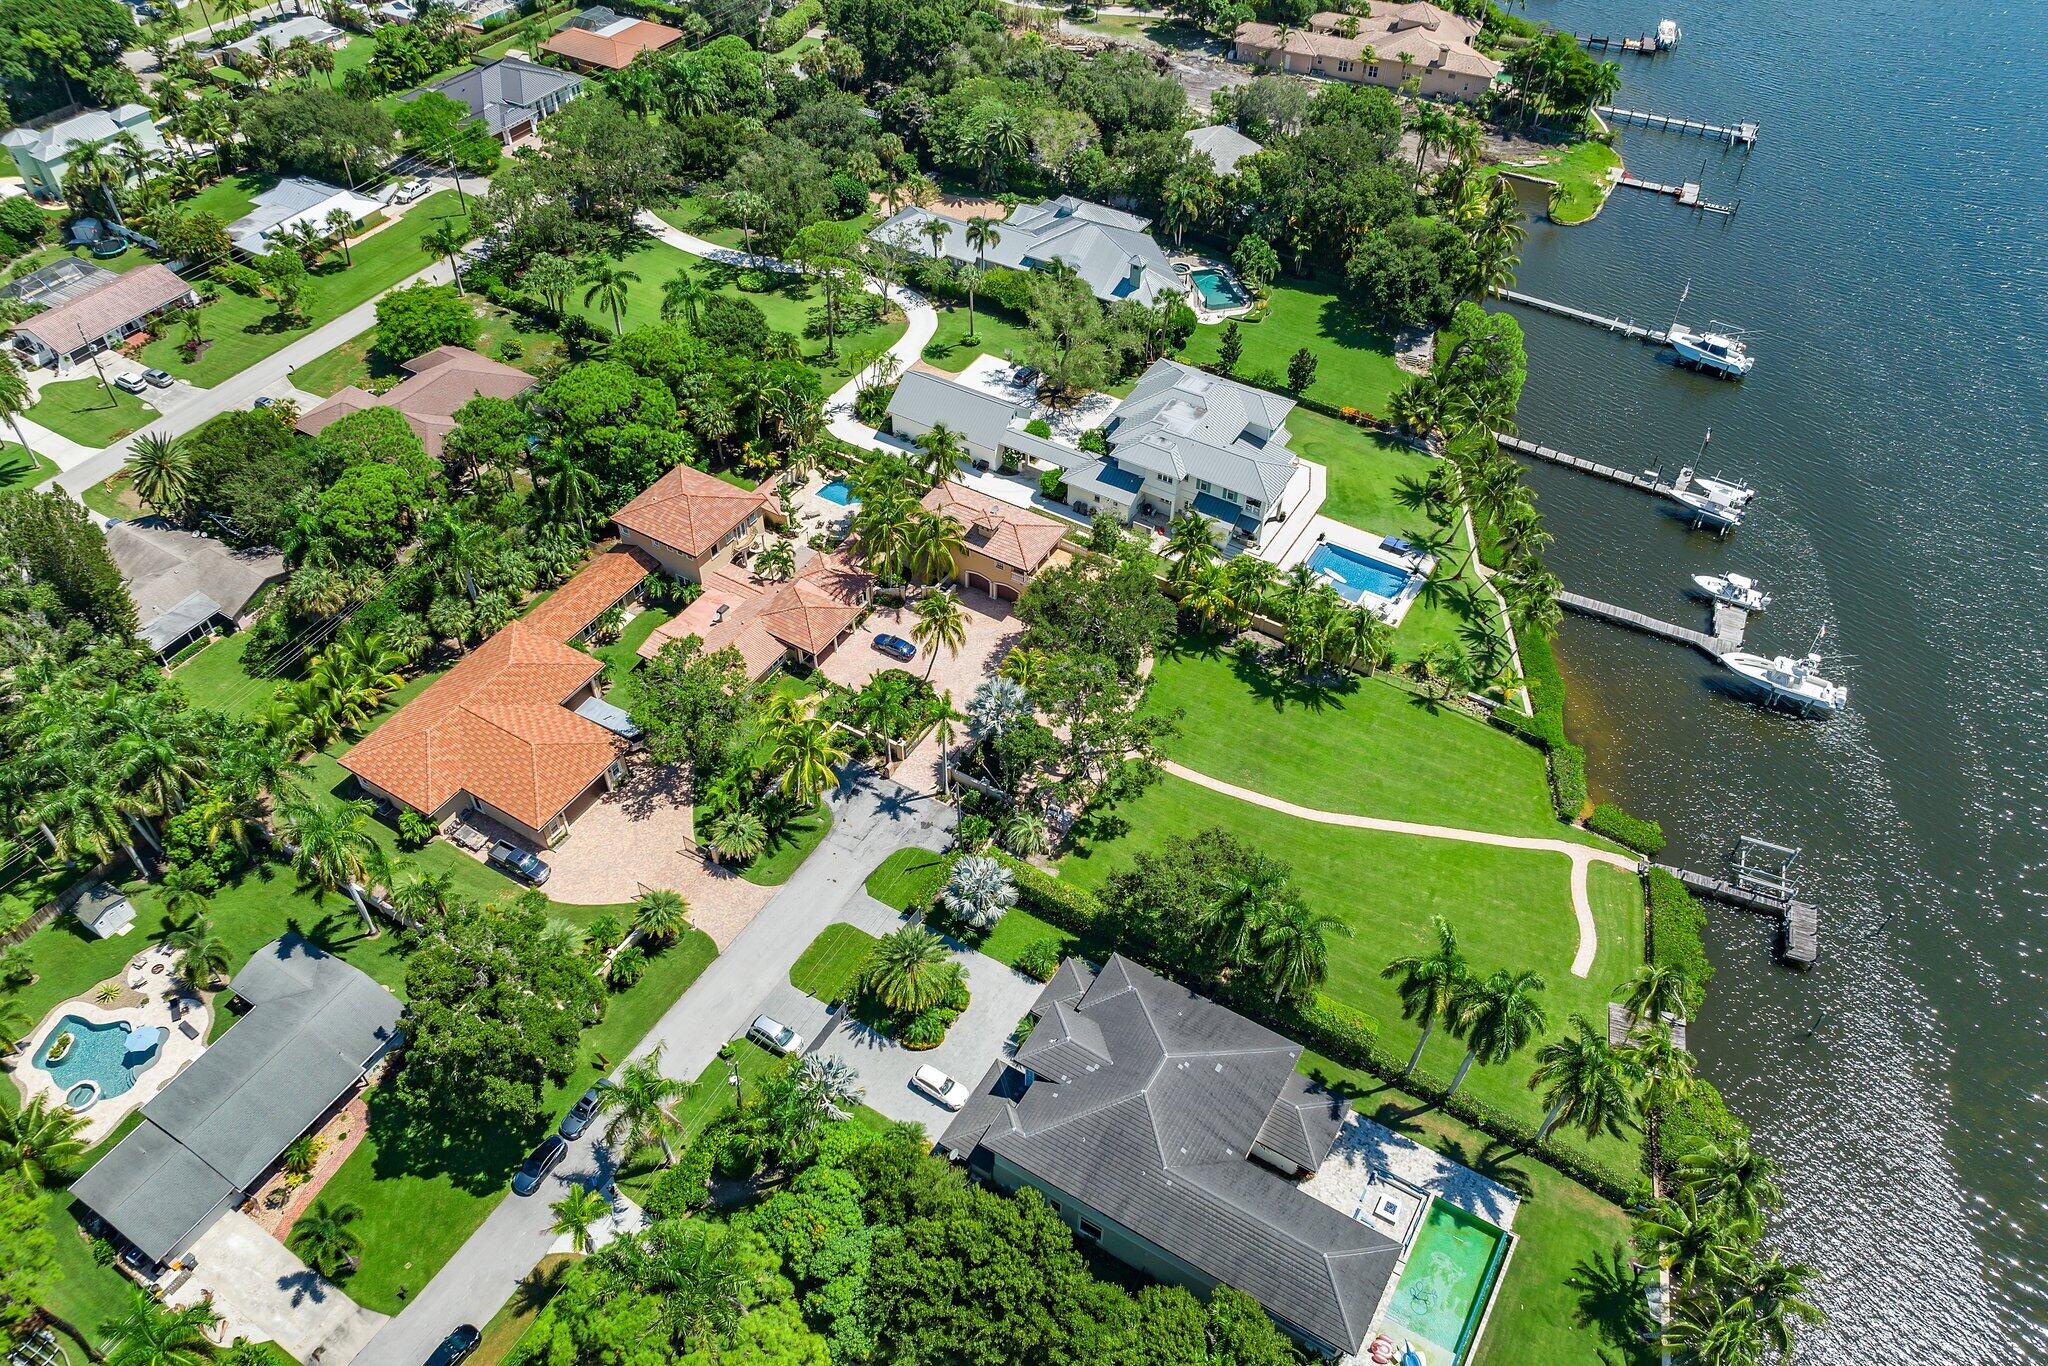 This presents to you the opportunity to acquire a waterfront, gated compound within the perimeter of Pennock Point on a private abutting street. 1.6 acres to make your very own, with over 150 feet on the wild and scenic Loxahatchee River. Wide water views with southerly orientation, minutes to the Jupiter Inlet and the blue water beyond. Priced at land value, on the property sits a recently updated original structure with 4 bedrooms and 5 baths. A newly constructed 3,000 square foot garage with 12 foot ceilings has room for even the experienced car/toy collector. A property worth viewing to see all the potential it holds.